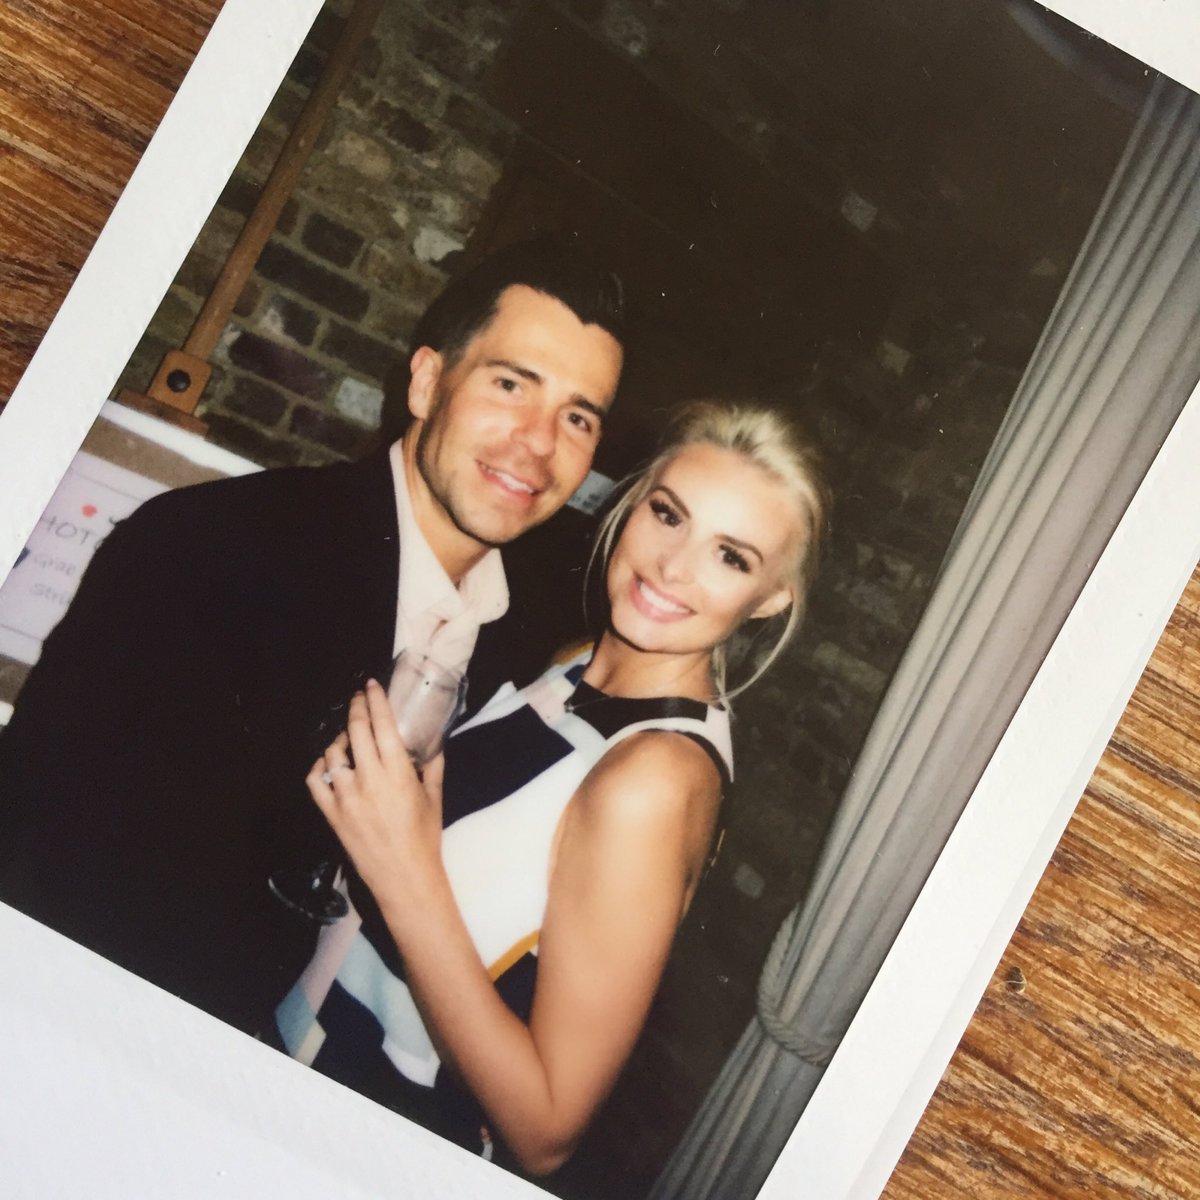 RT @olivermellor: Weekend spent in the homeland of Windsor with the wife @Rhianmarie https://t.co/Ro3GwqLfqC